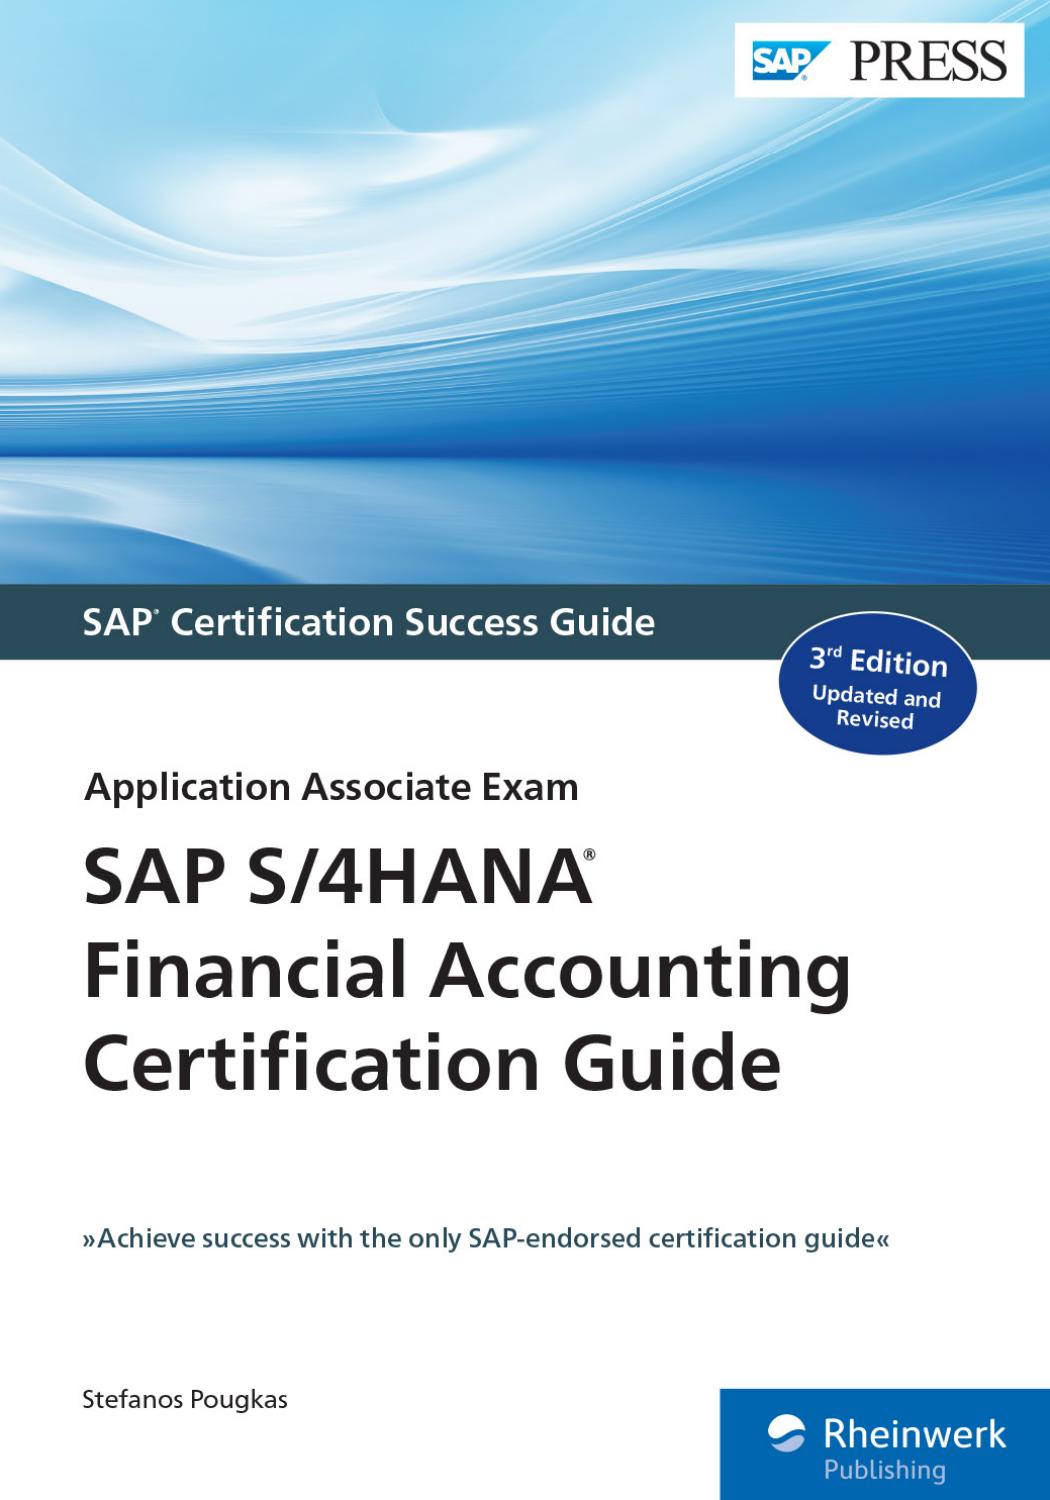 SAP S/4HANA Financial Accounting Certification Guide (3rd Edition)